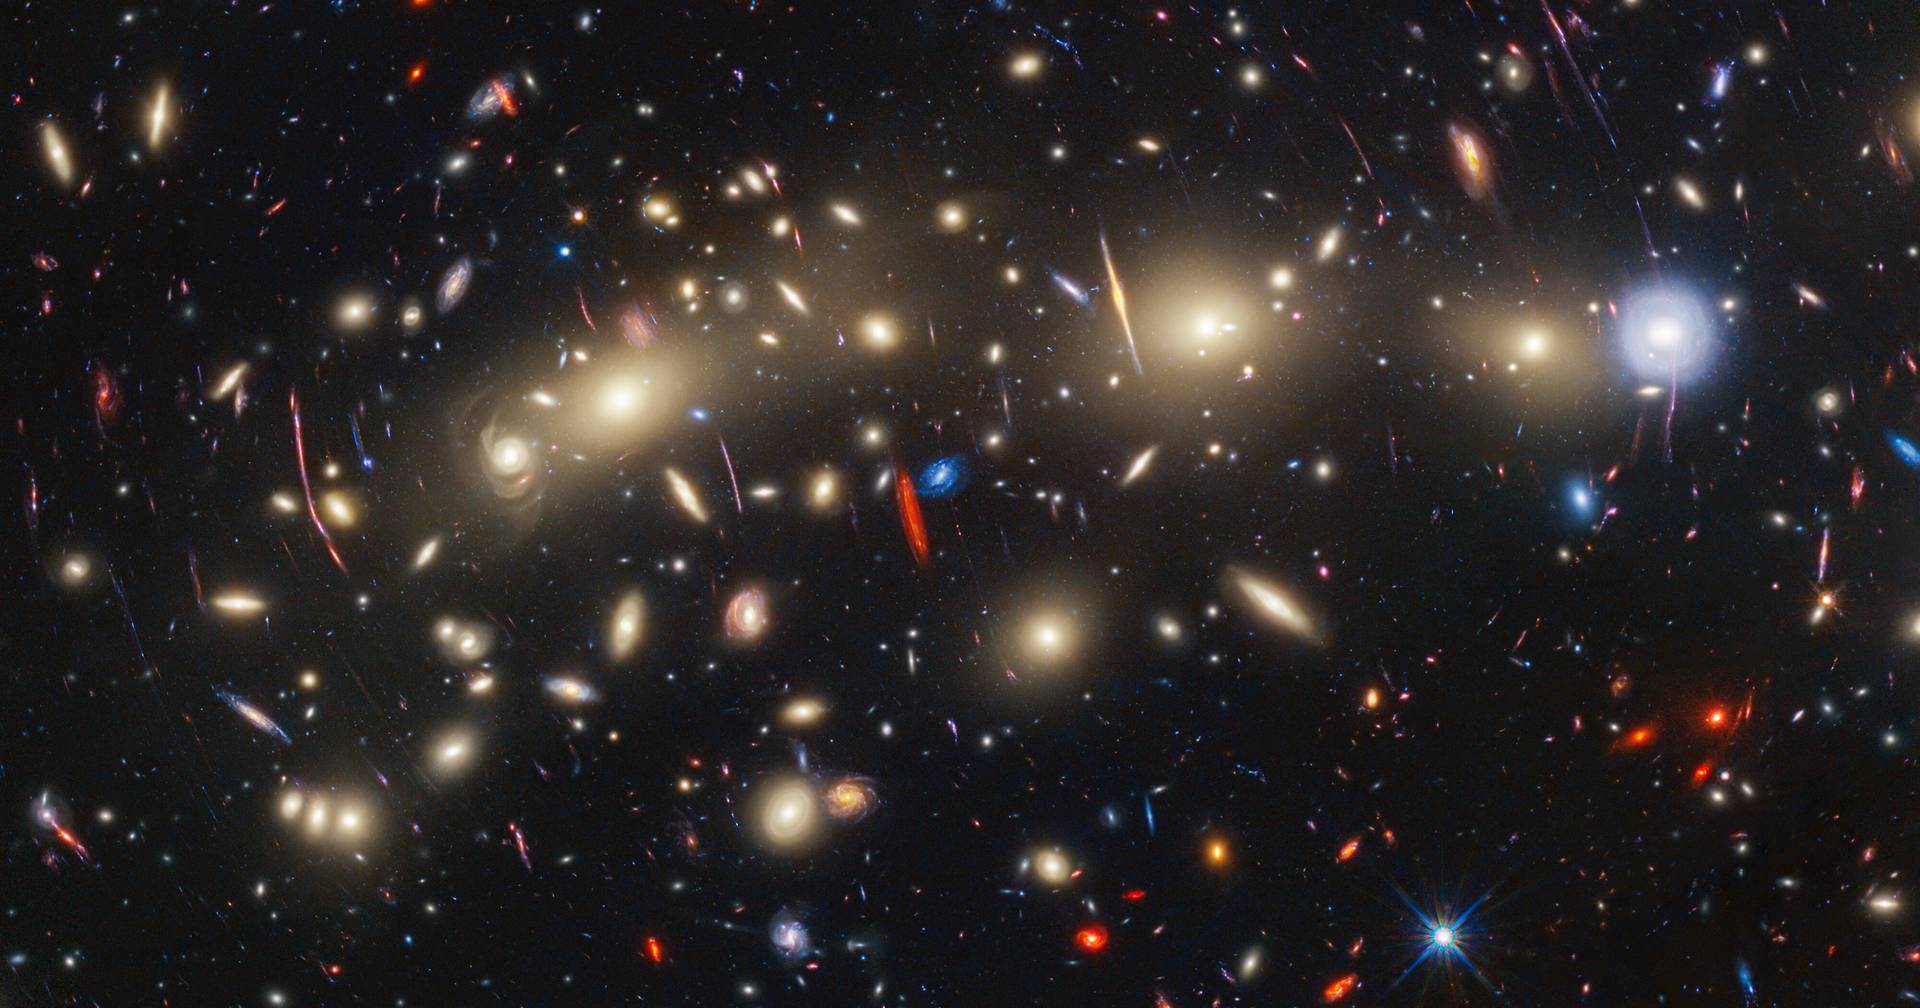 James Webb and Hubble have teamed up to get the “most colorful view” of the universe